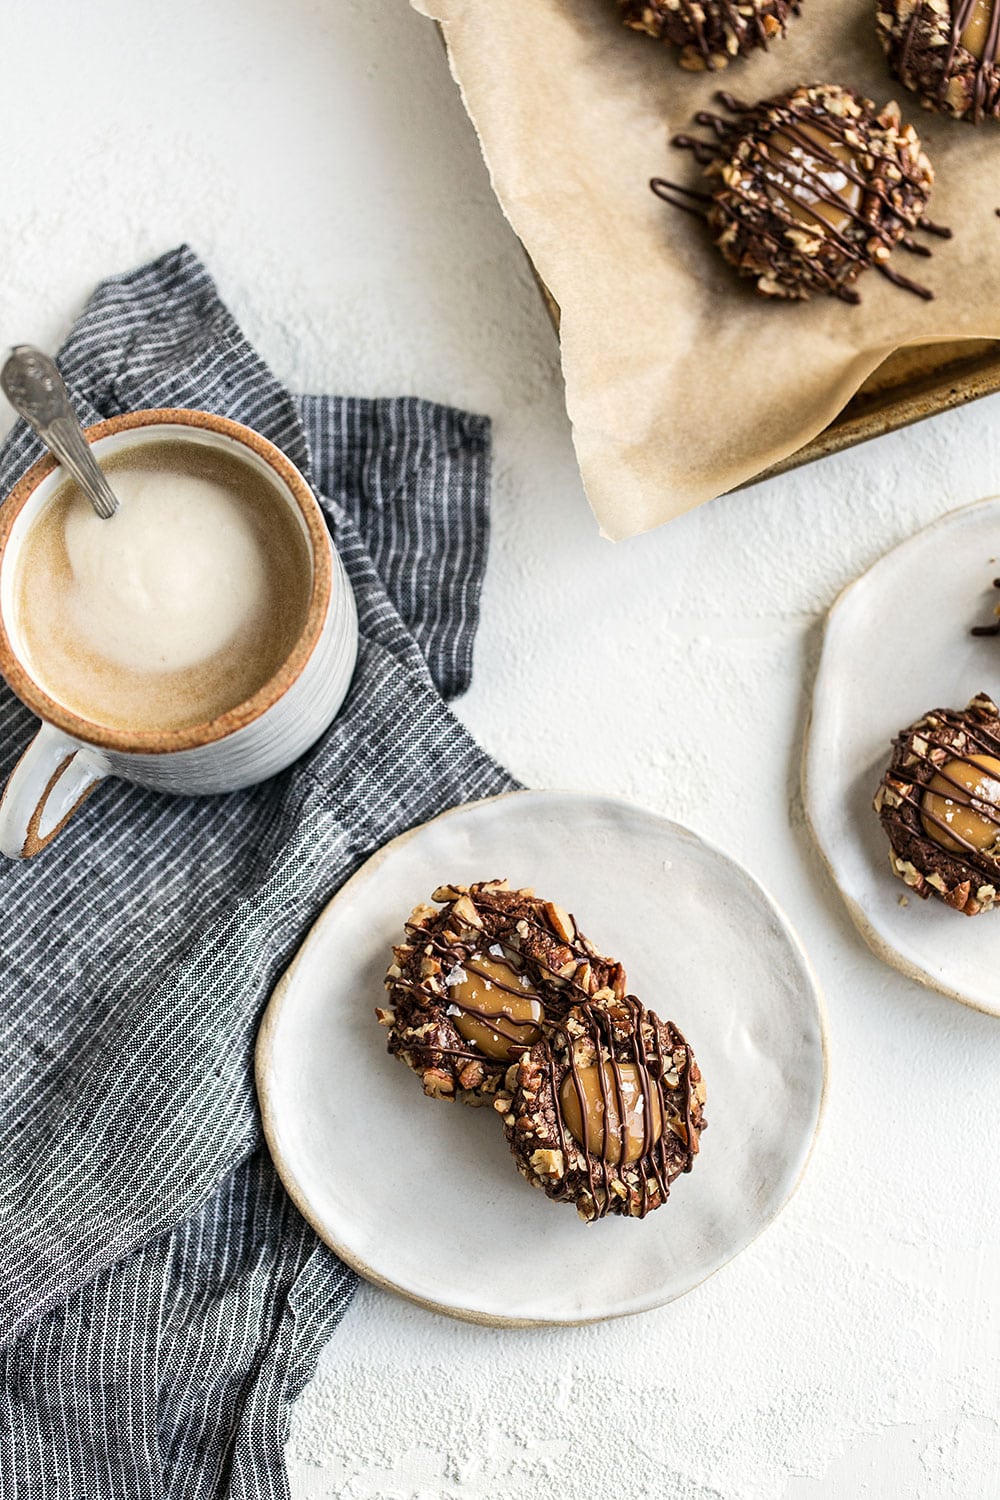 This Turtle Thumbprint Cookie recipe features a cocoa cookie rolled in pecans, filled with a salted caramel thumbprint, and drizzled with chocolate. A perfect Christmas cookie recipe! 